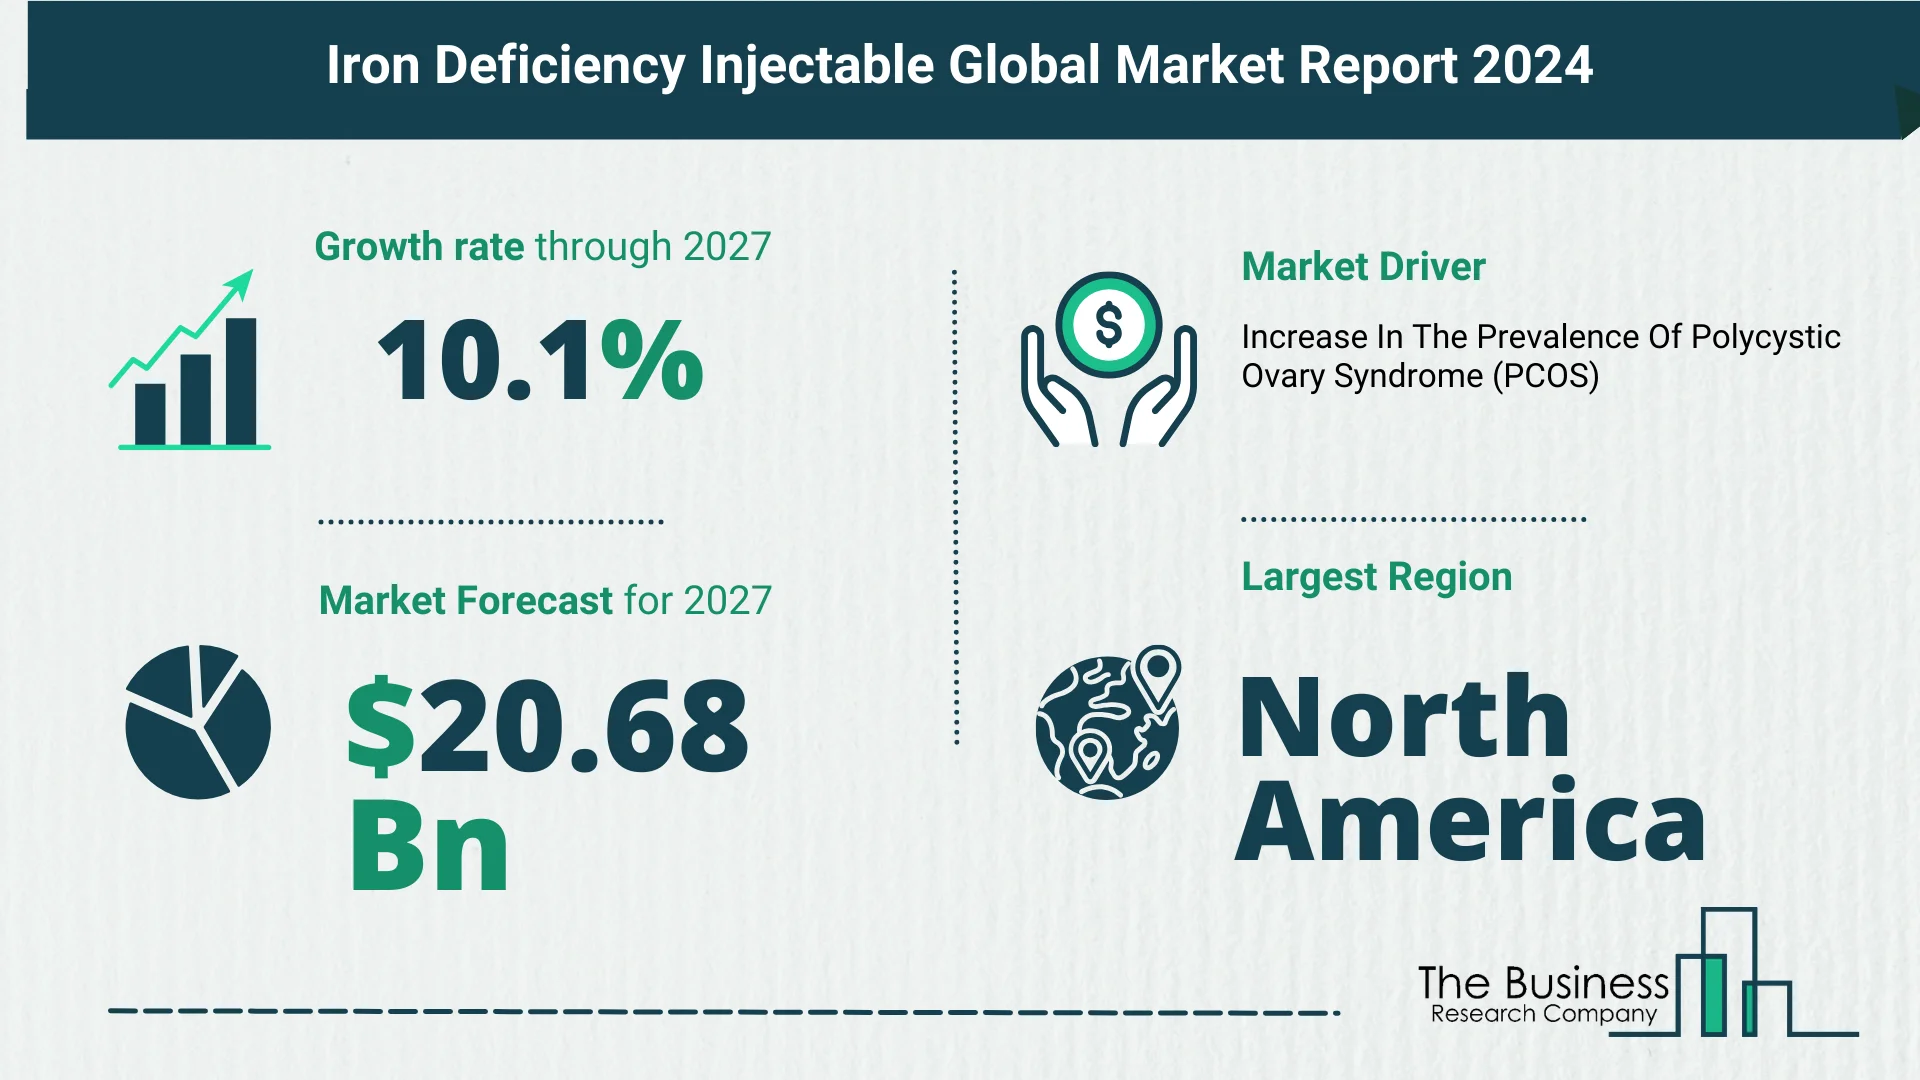 5 Key Insights On The Iron Deficiency Injectable Market 2024